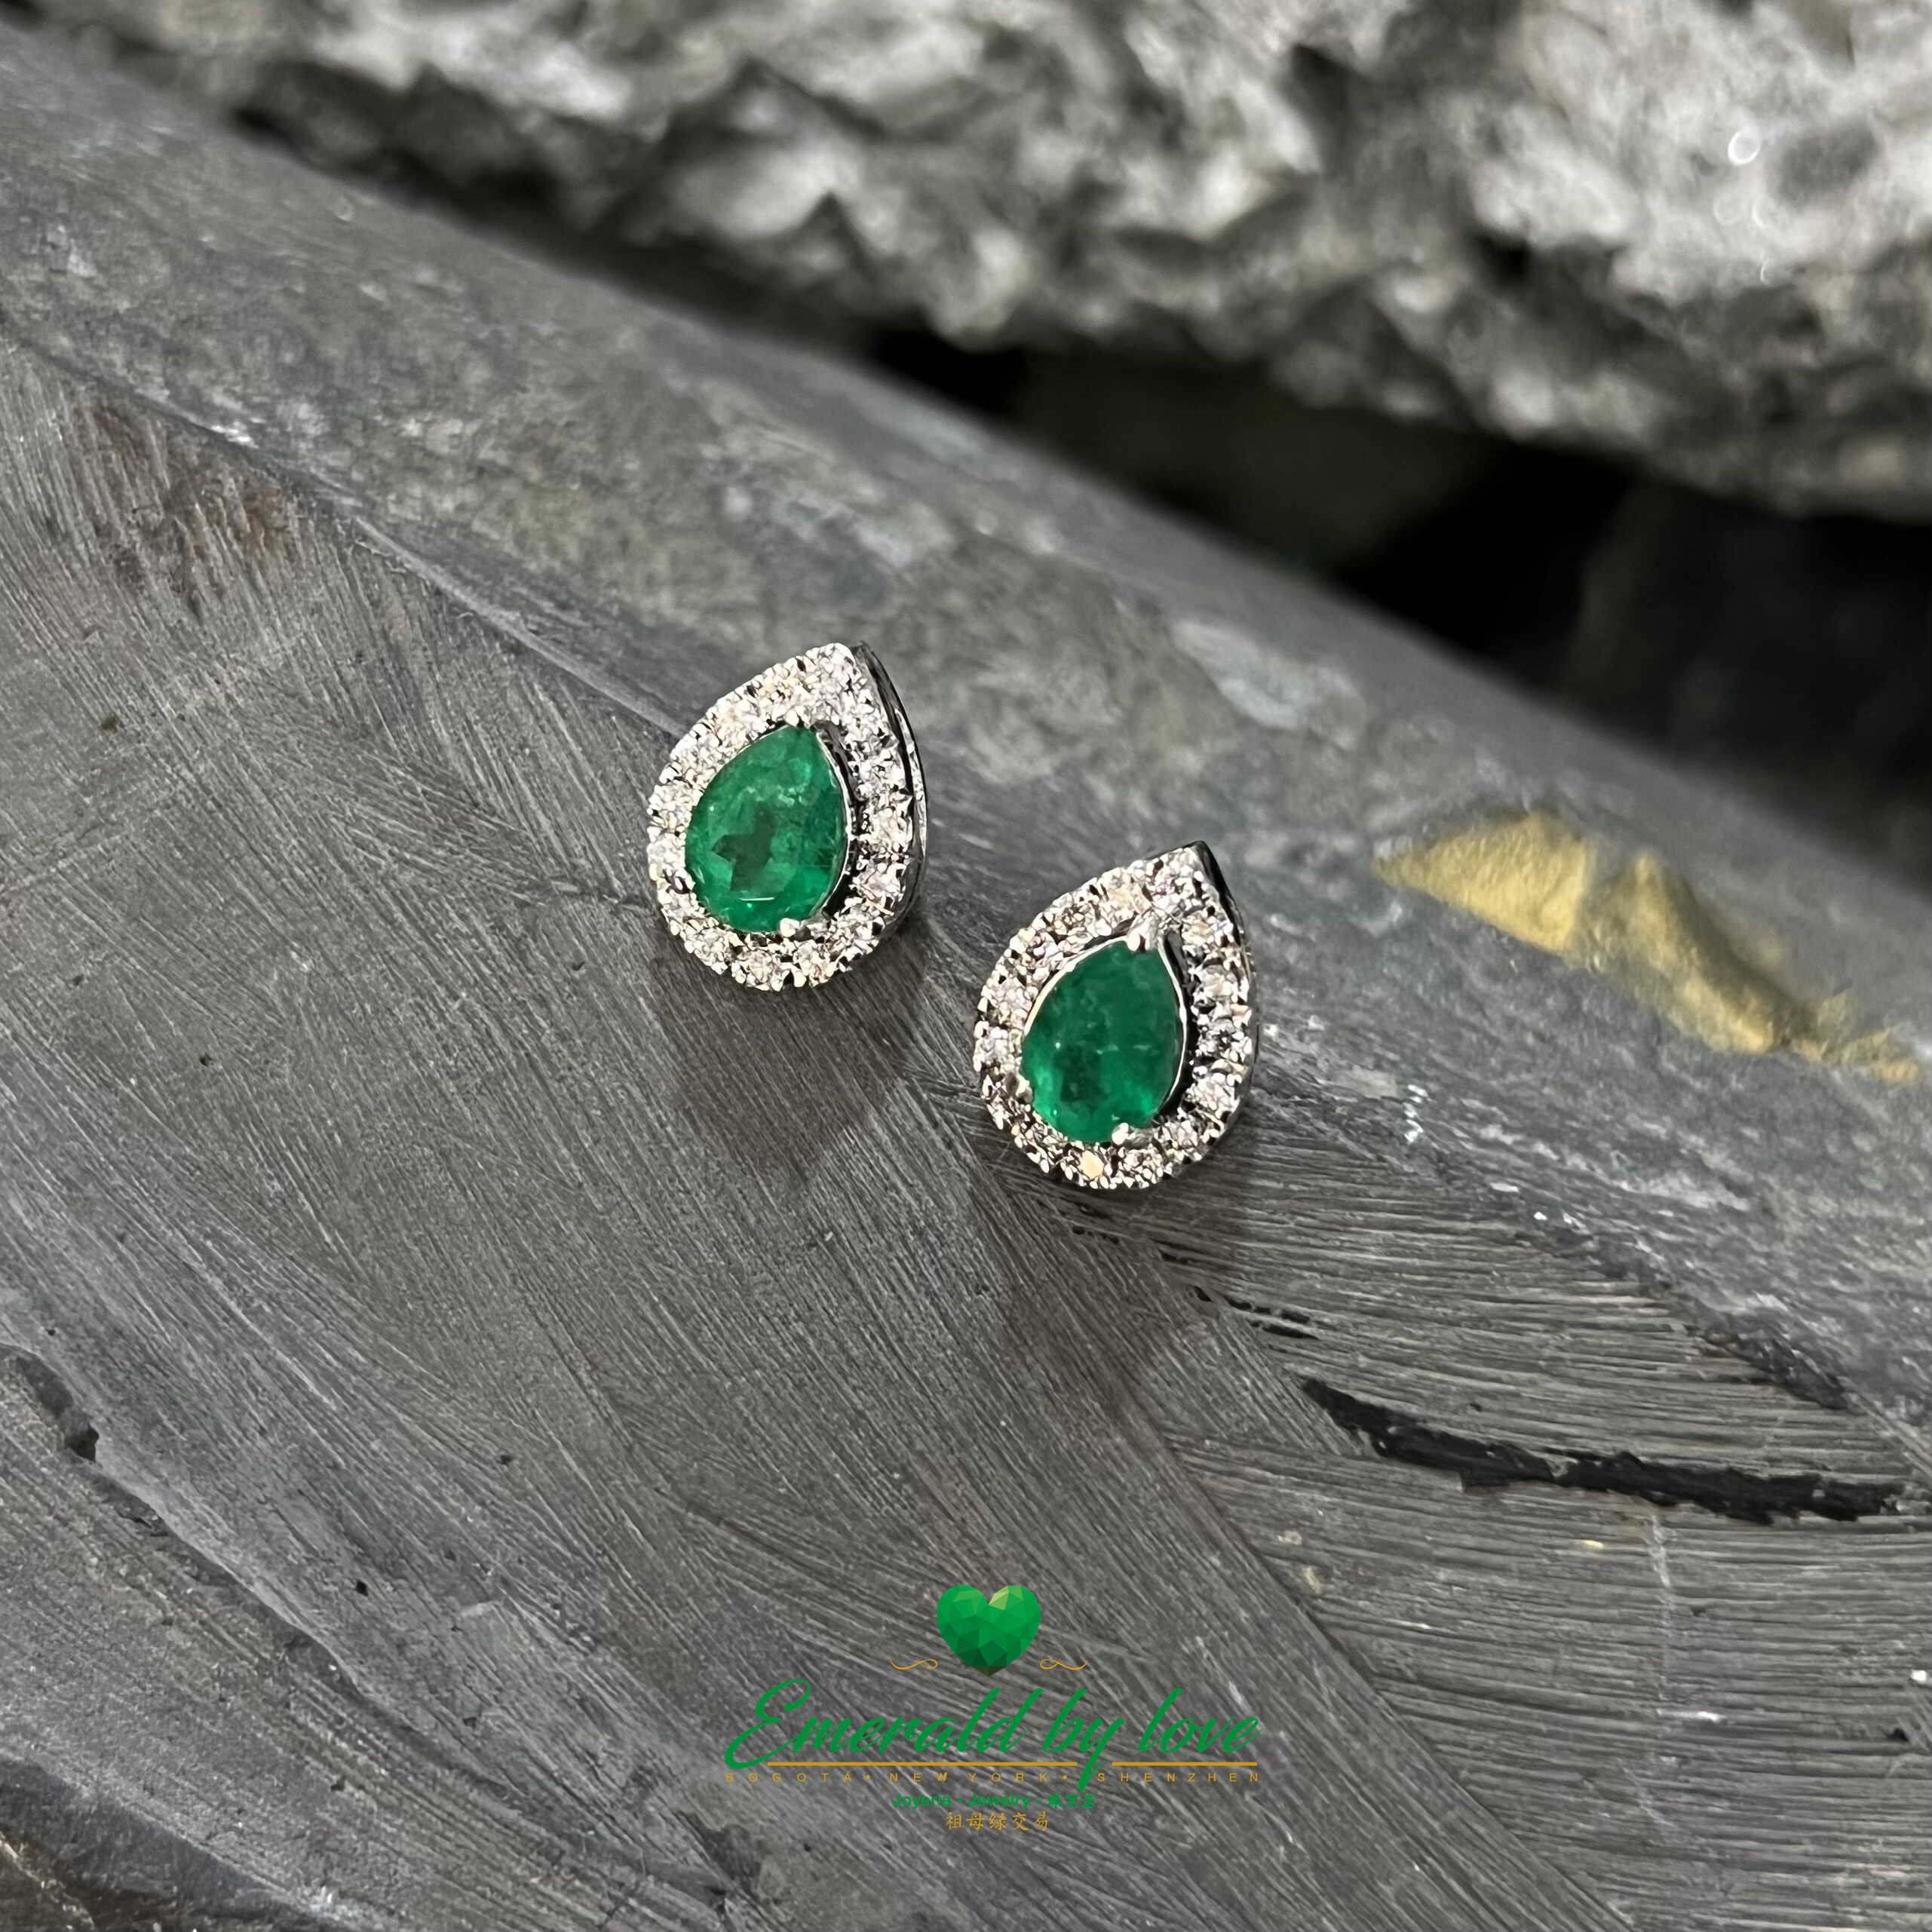 Intriguing Marquise White Gold Earrings with 1.2 ct Teardrop Emeralds and 0.3 tcw Diamonds